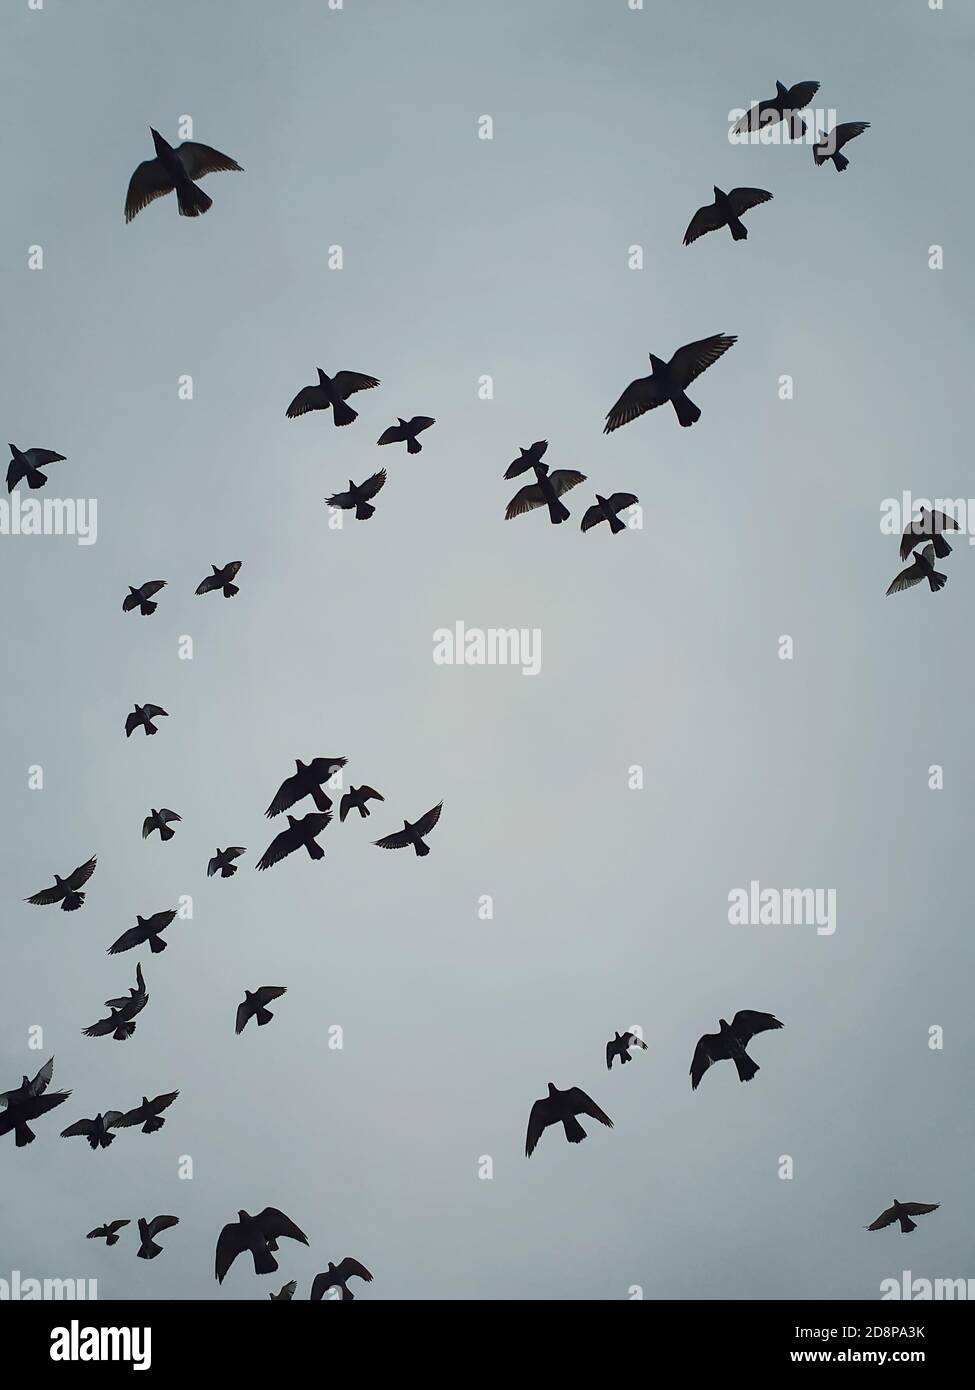 Flock of migratory birds flying over head against the cloudy autumn sky background. Birds silhouettes, nature wildlife. Fall season scene Stock Photo